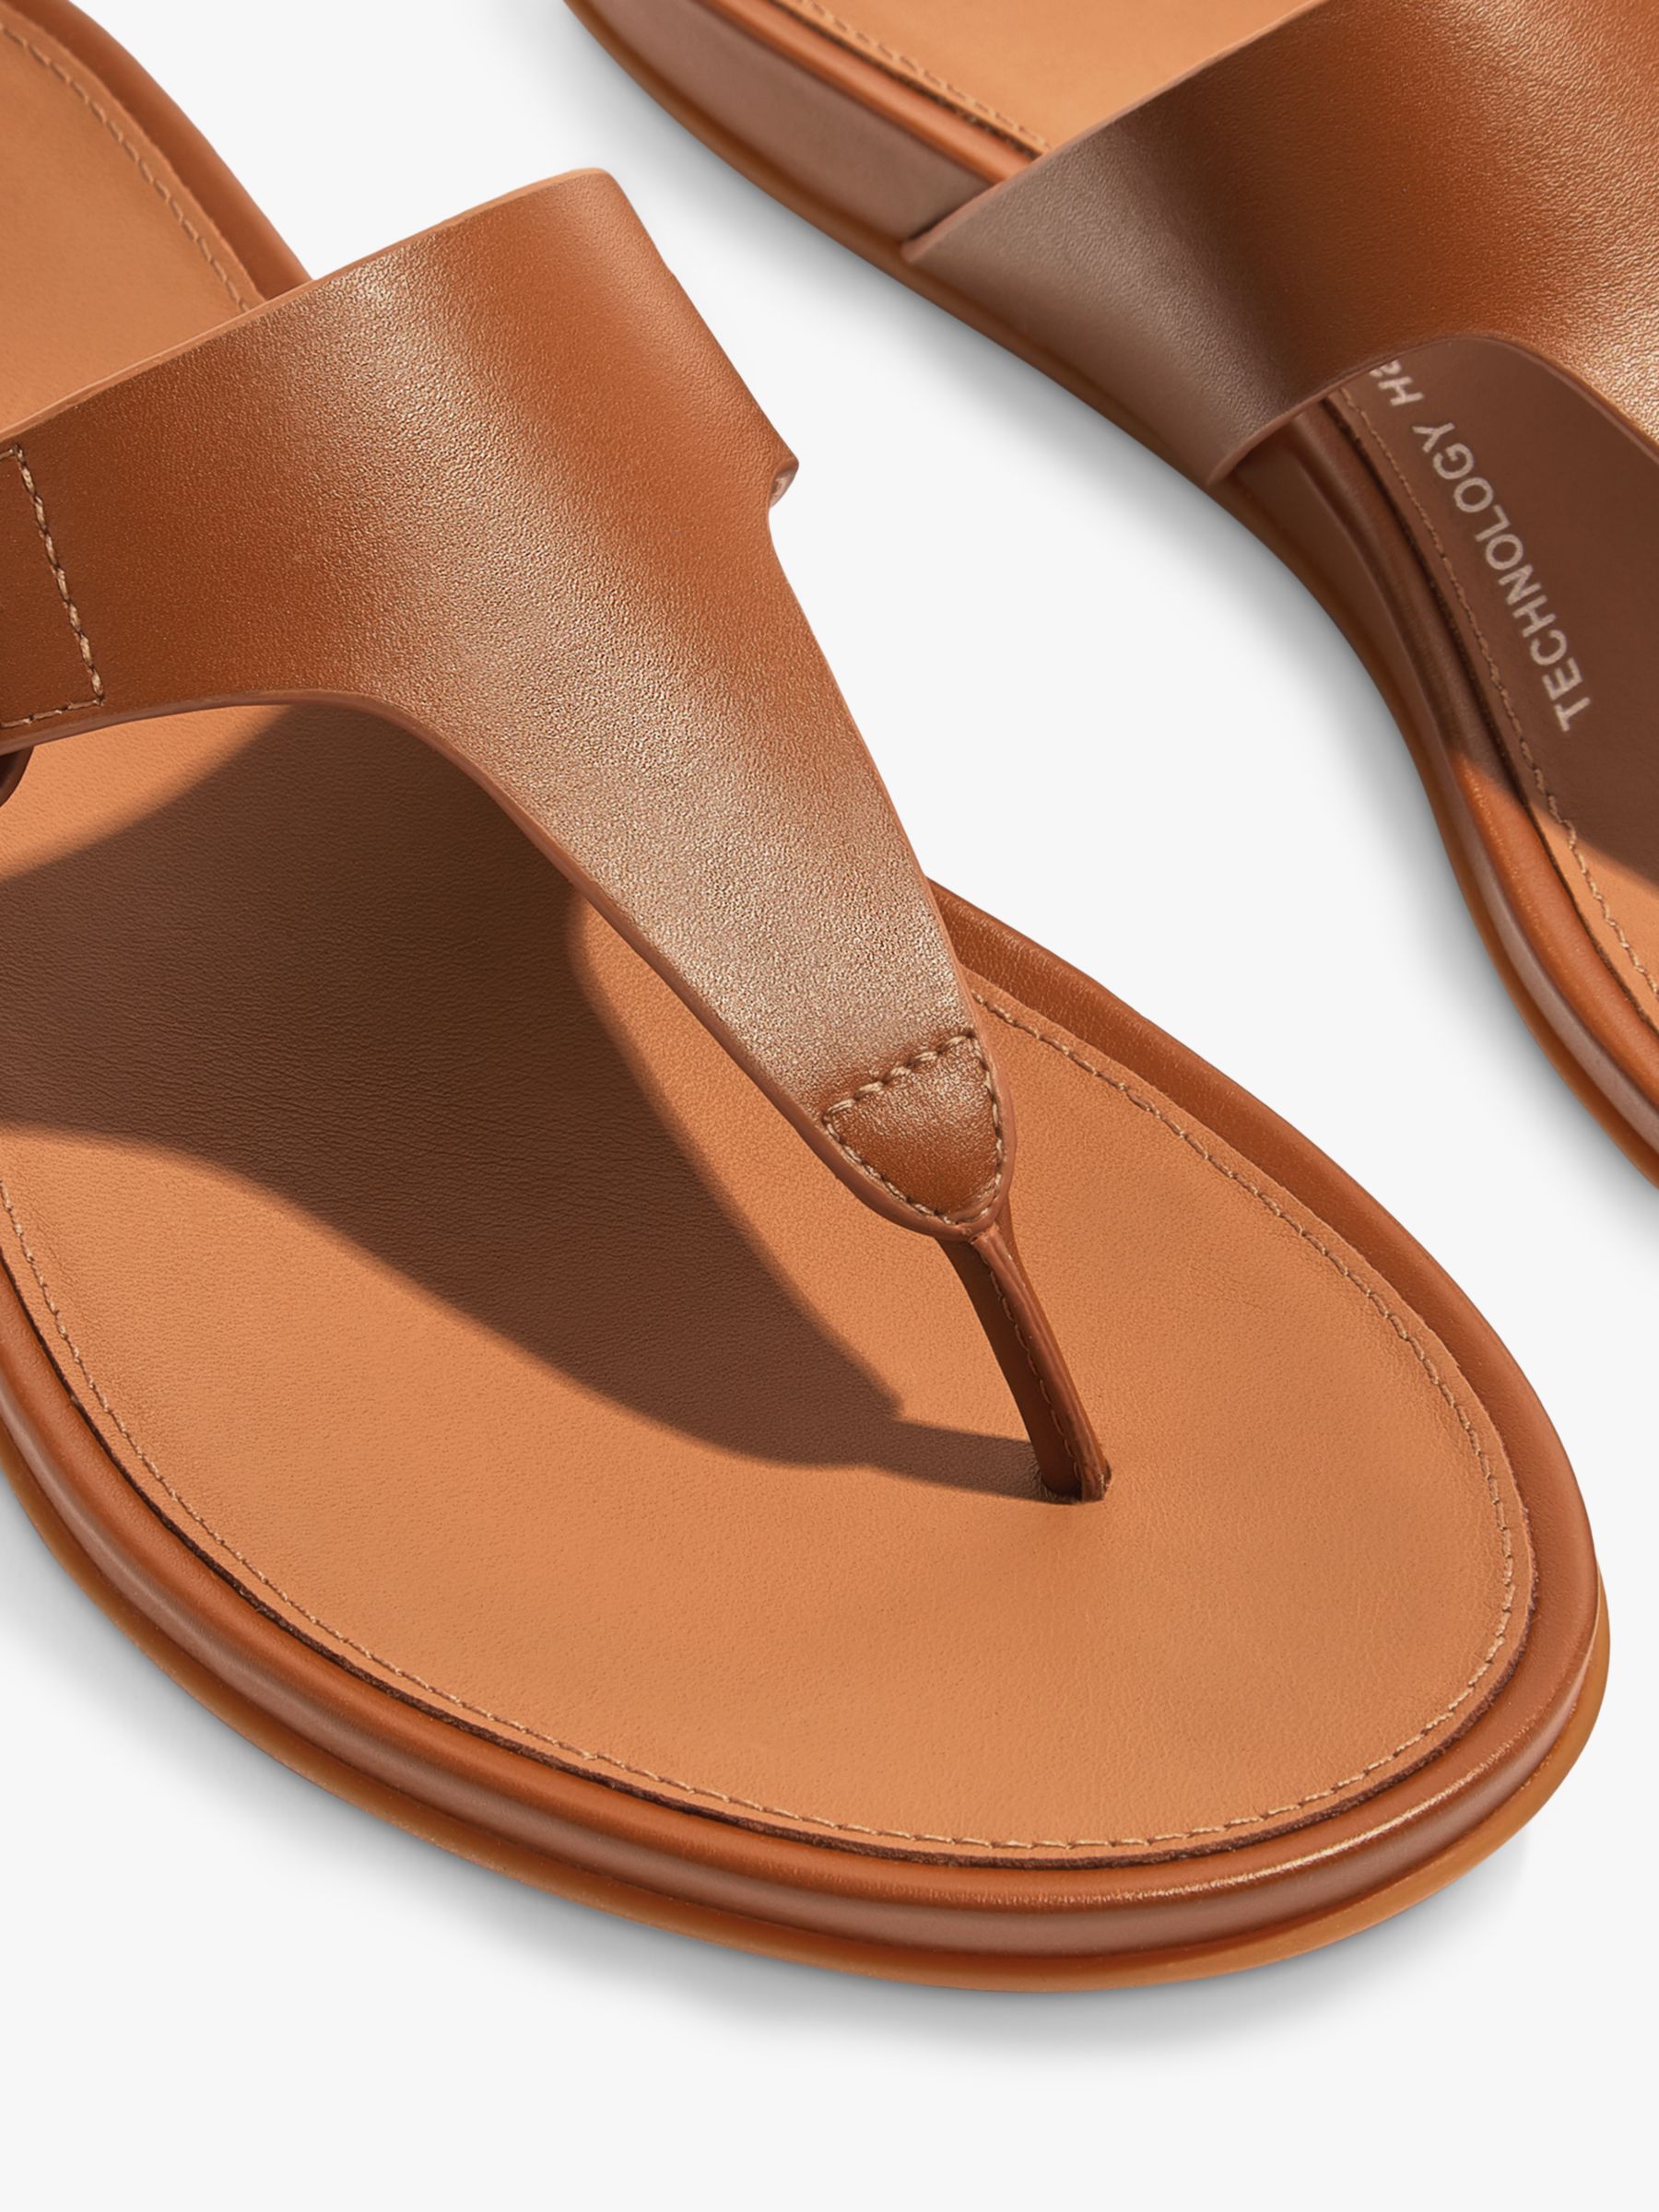 FitFlop Gracie Leather Buckle Detail Flip Flops, Light Tan at John